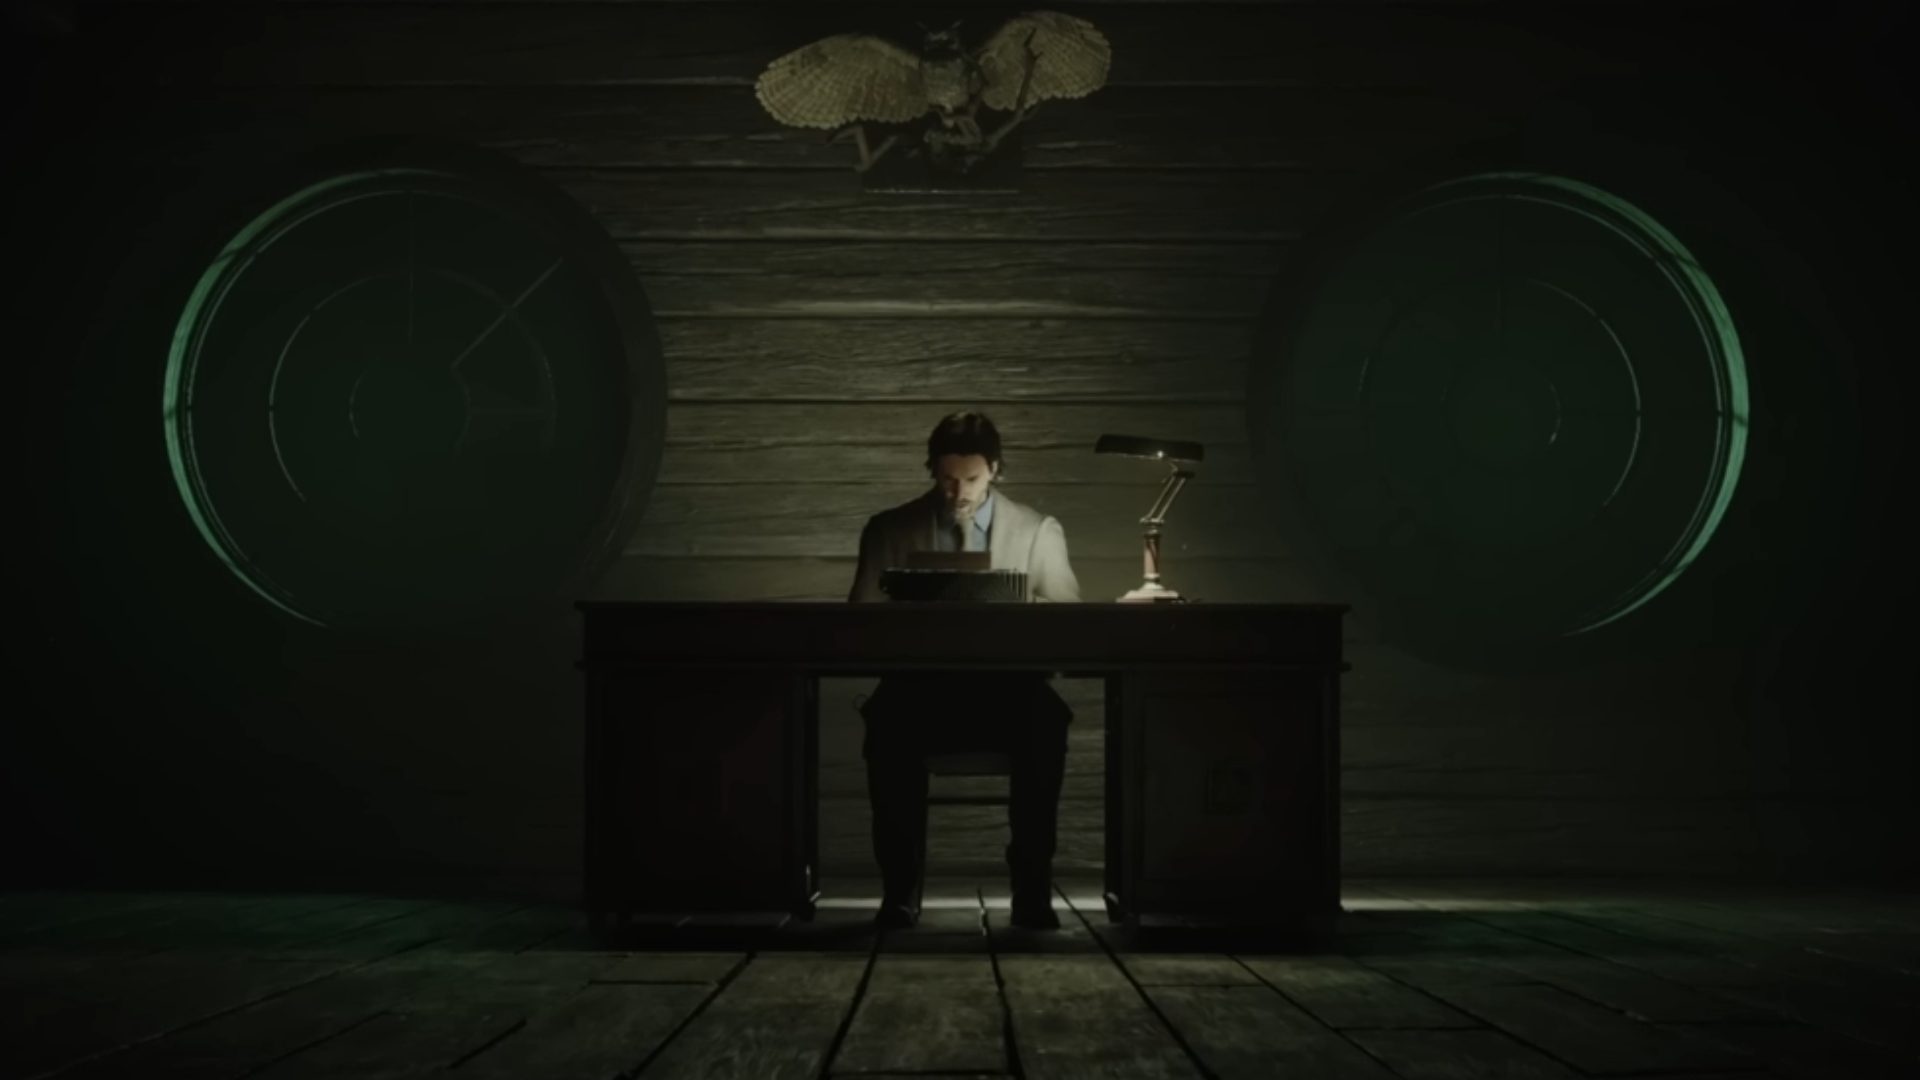 alan-wake-2-everything-we-know-about-the-sequel-so-far-pc-gamer